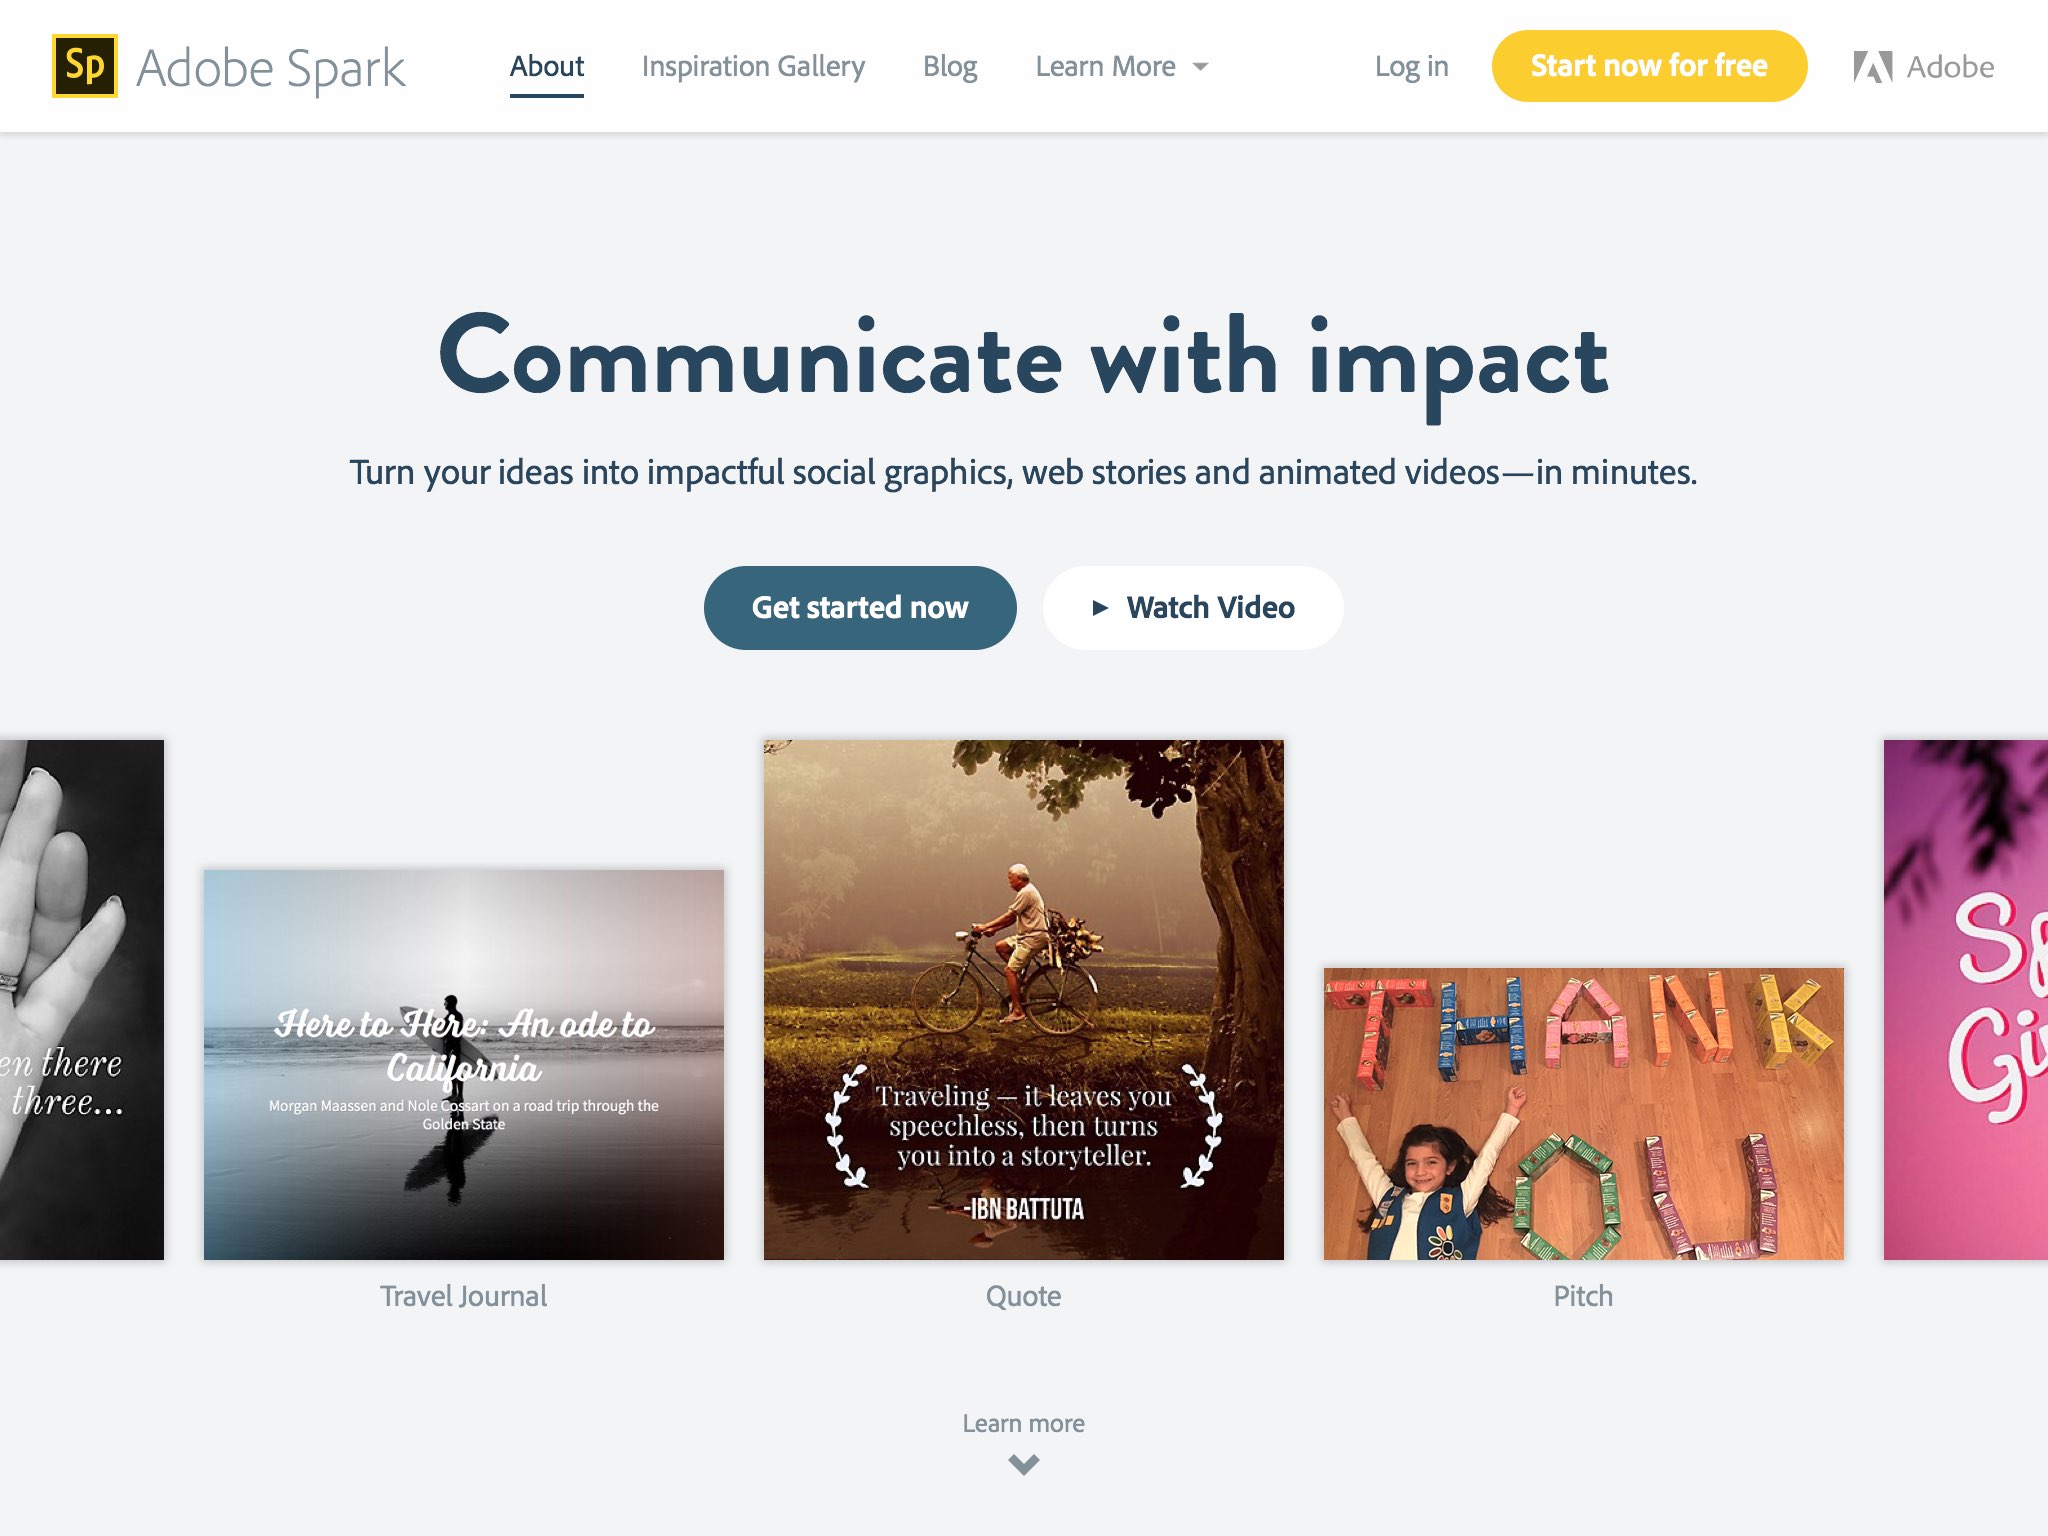 Turn your ideas into impactful social graphics, web stories, and animated videos - in minutes.